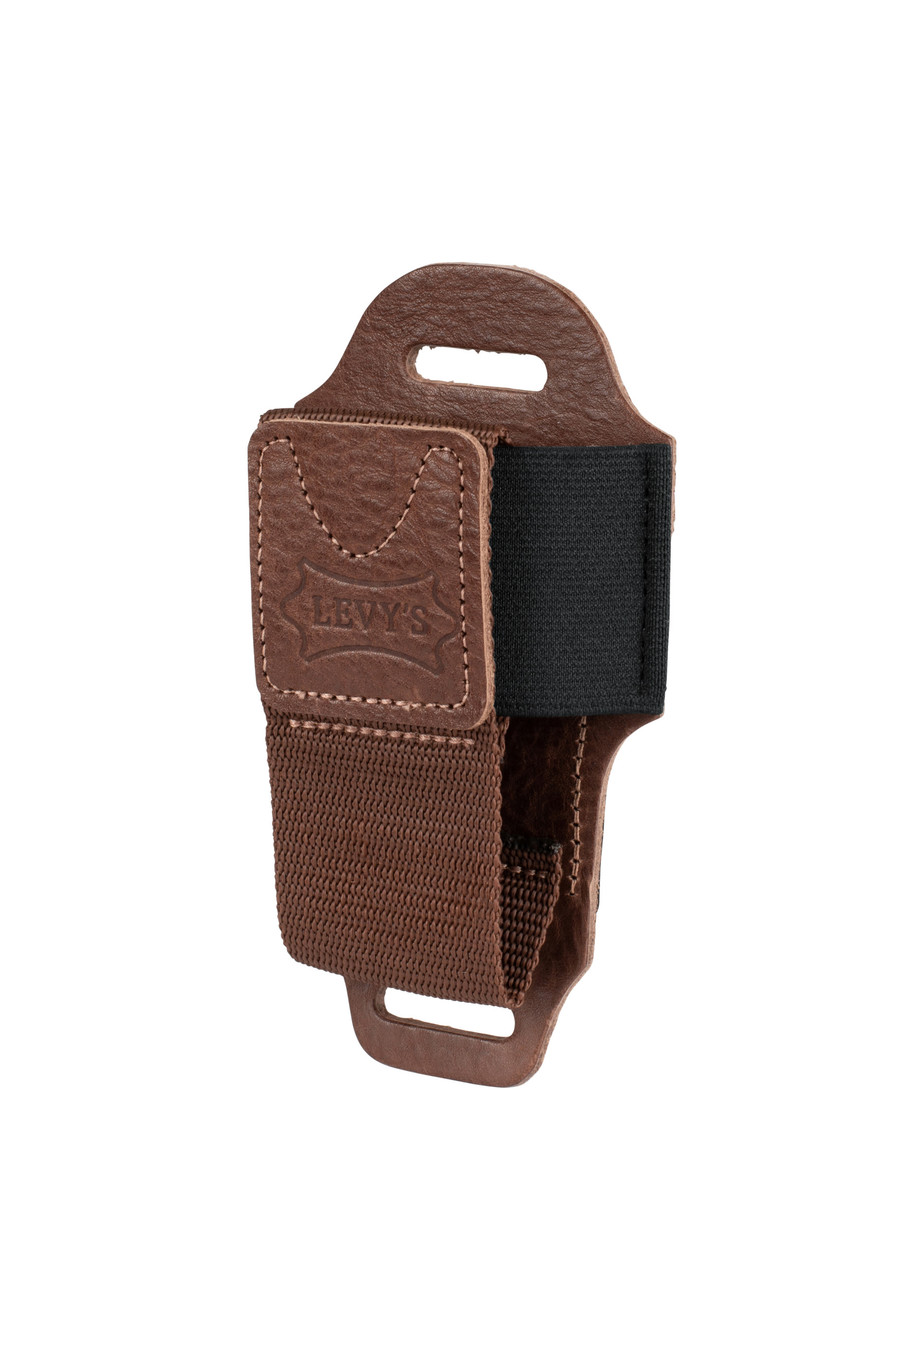 Levy's Levy's  Wireless Transmitter Bodypack Holder - Brown Leather